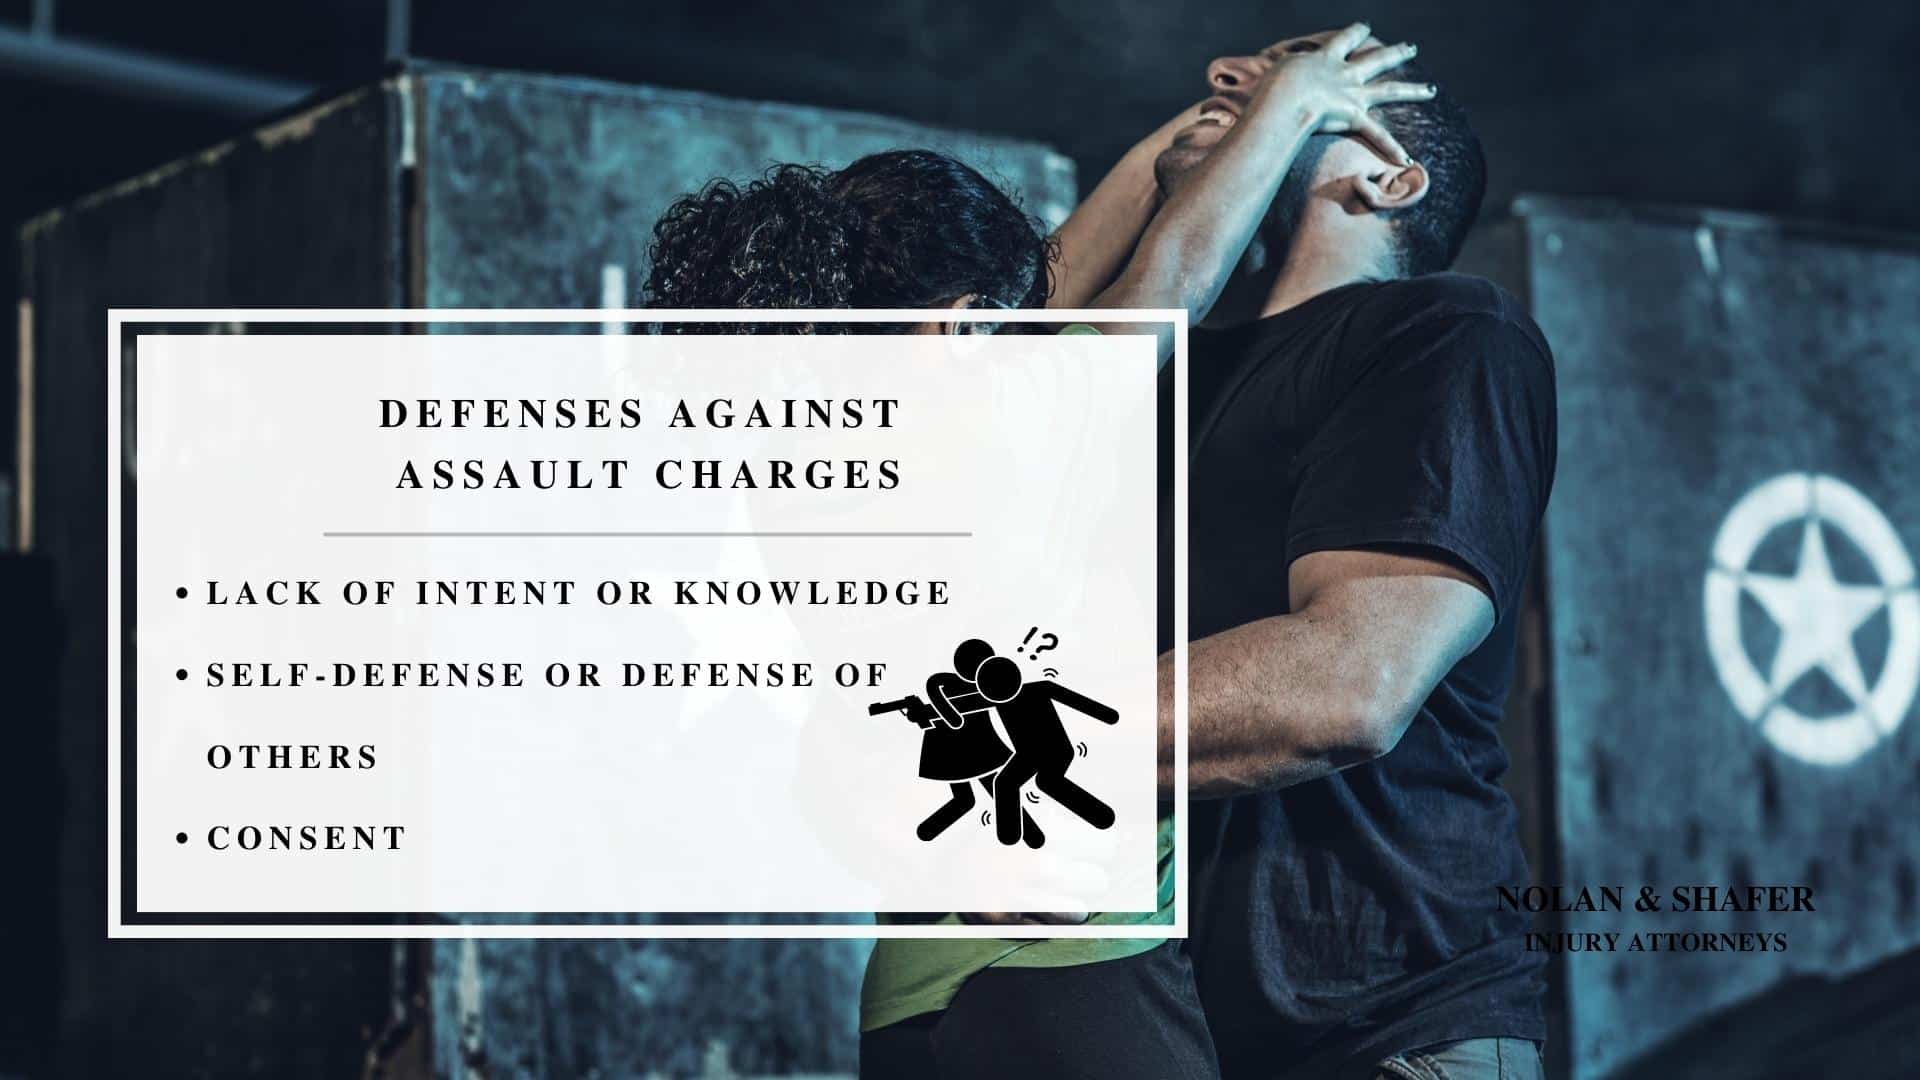 Infographic image of defenses against assault charges